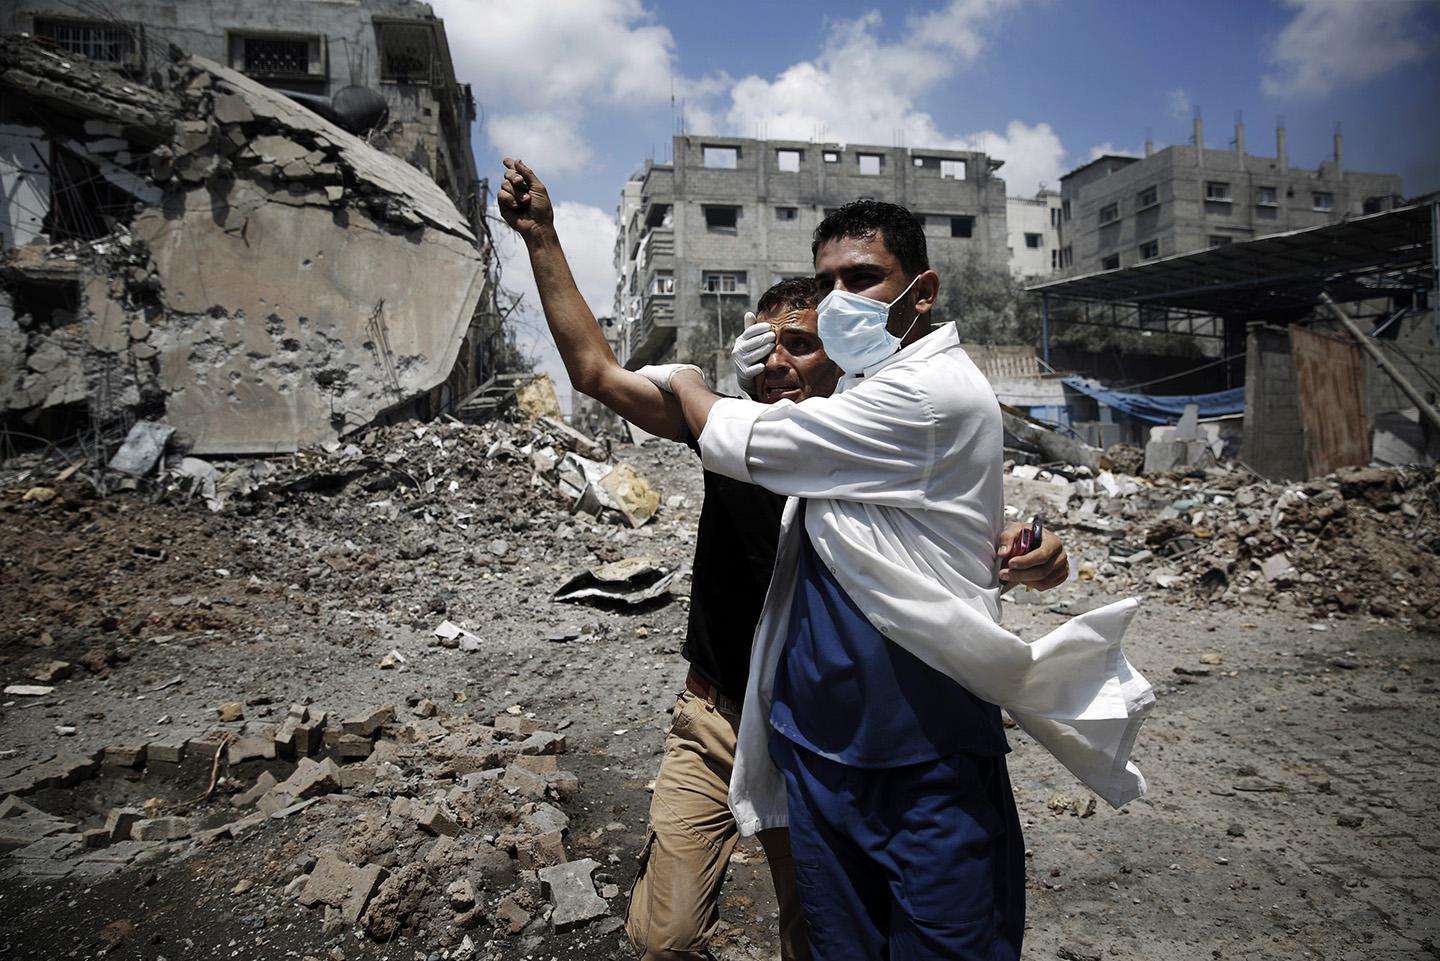 A medic helps a Palestinian in the Shejaia neighborhood, which was heavily shelled by Israel during fighting, in Gaza City.